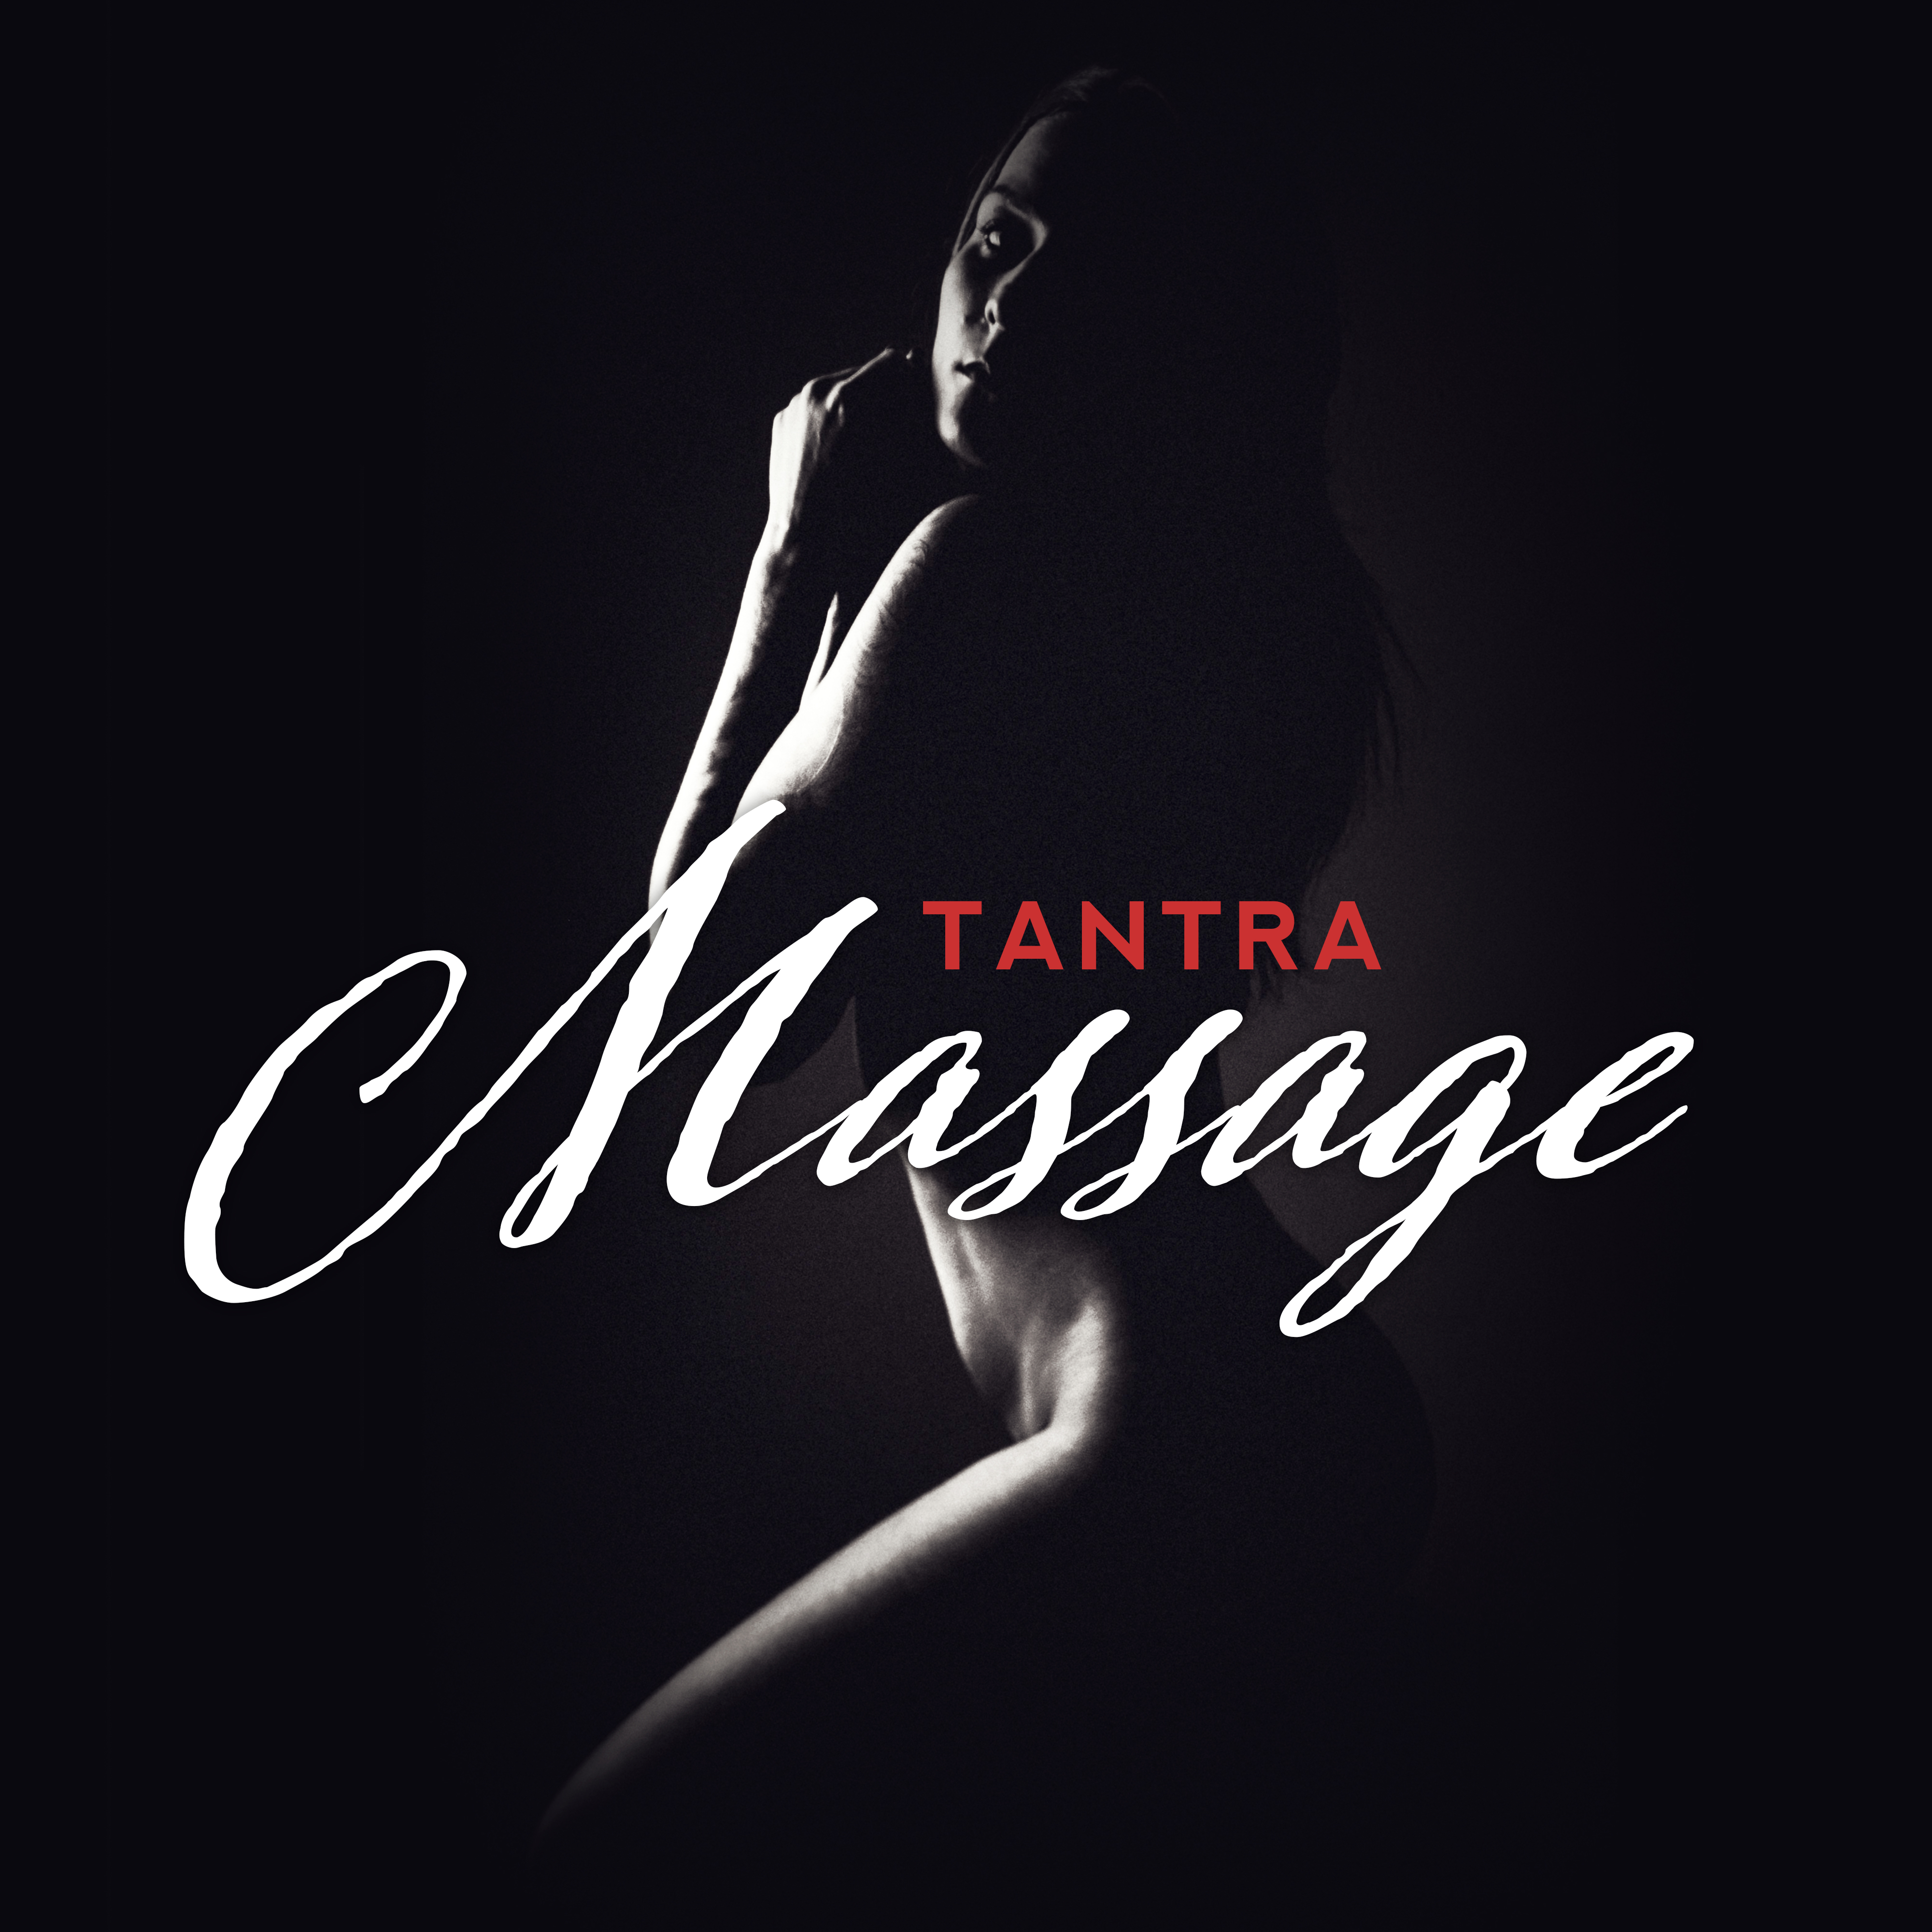 Tantra Massage: Deeply Relaxing Chillout Music for Emotional and ****** Therapy through Massage